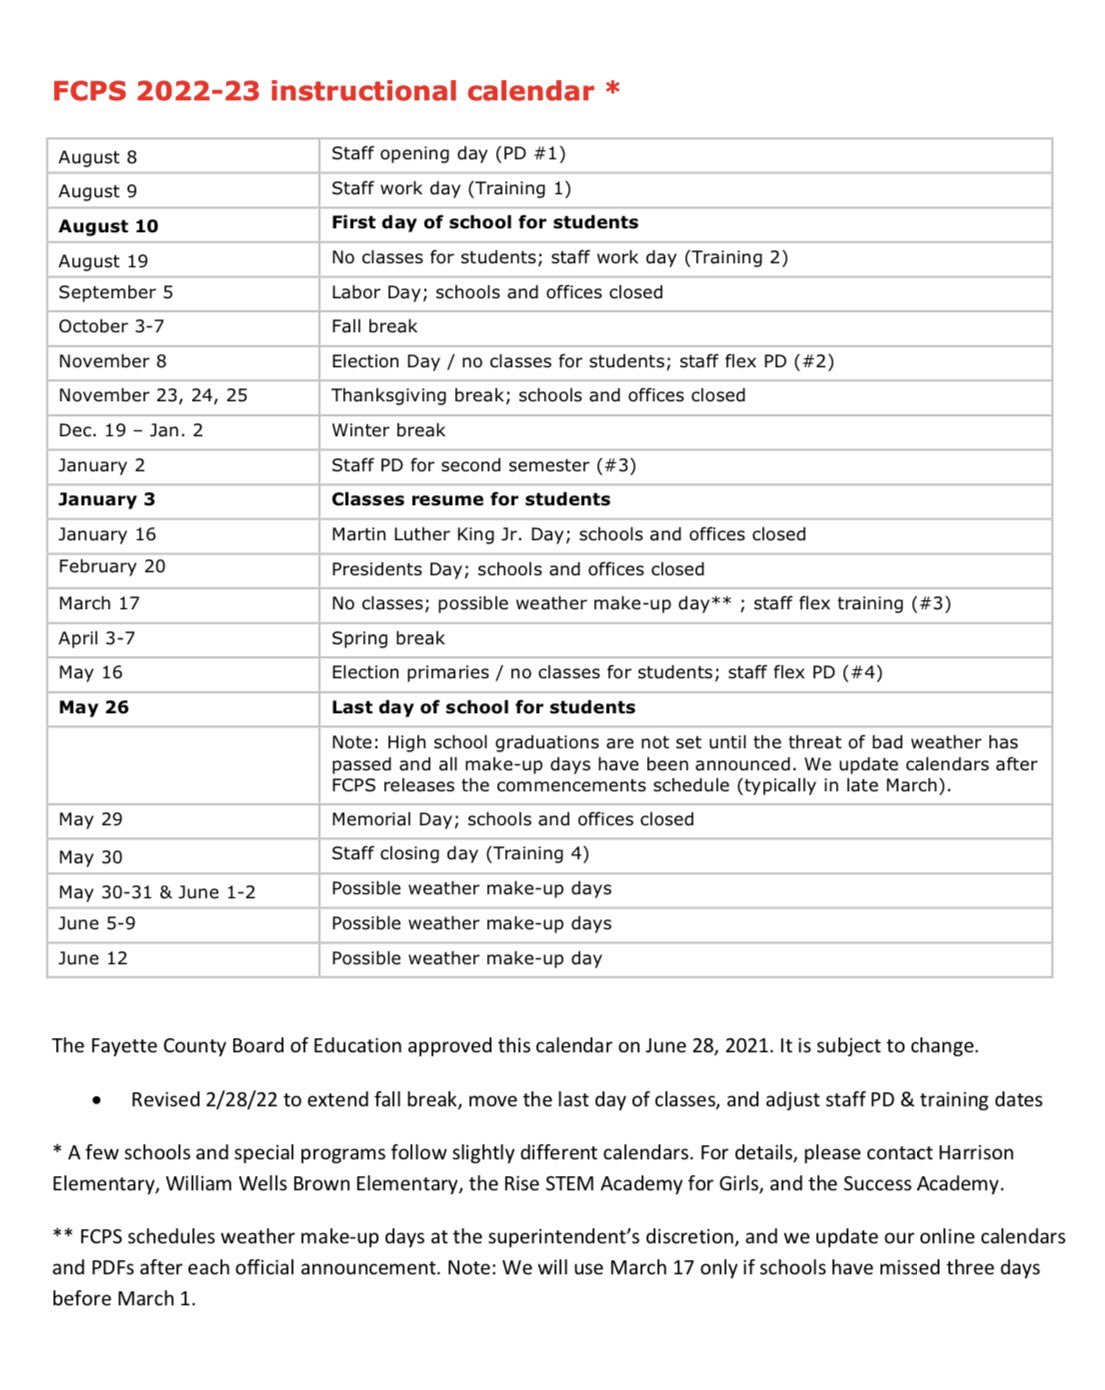 Fcps Calendar 2022 19 Tyler Murphy On Twitter: "Tonight, Our Board Unanimously Approved An  Amended Version Of The 2022-2023 Instructional Calendar That Would Include  A Week-Long Fall Break From October 3 To 7, 2022, And Move